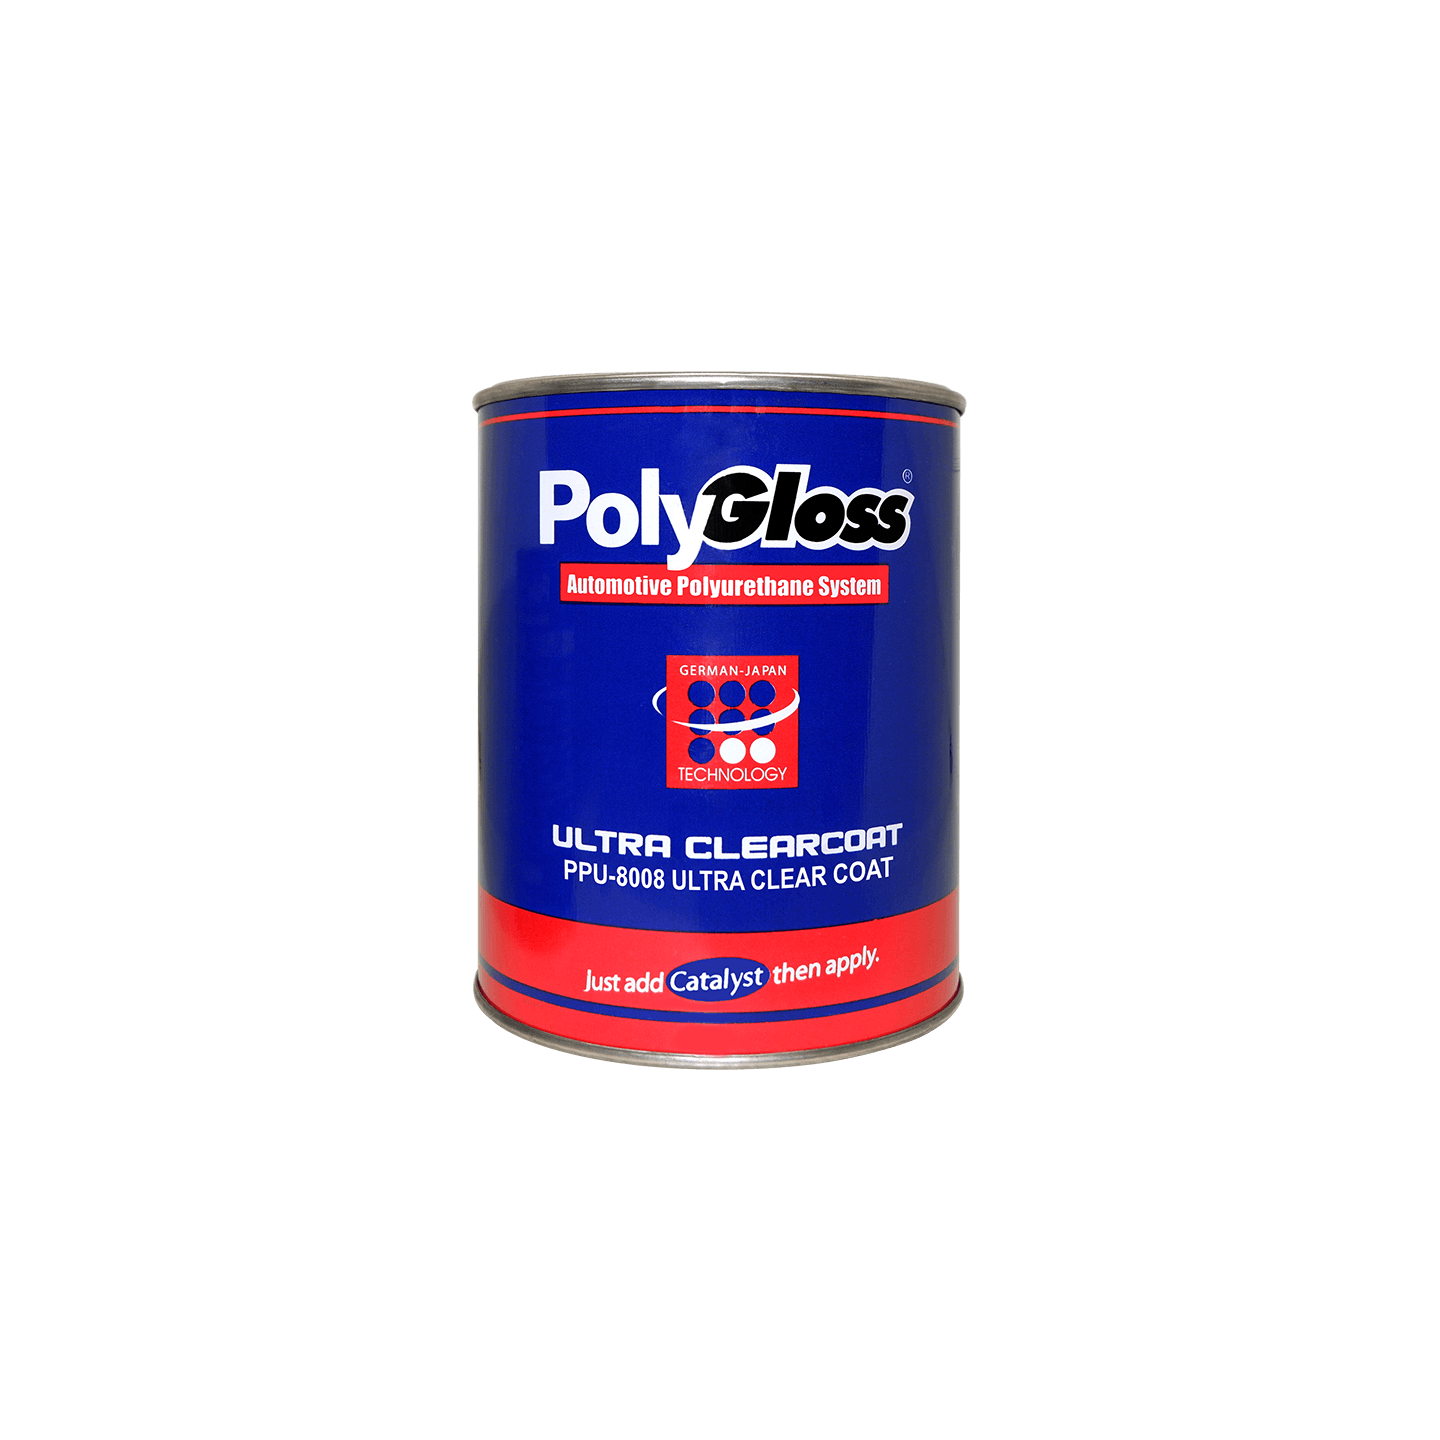 Polygloss Ultra Clearcoat